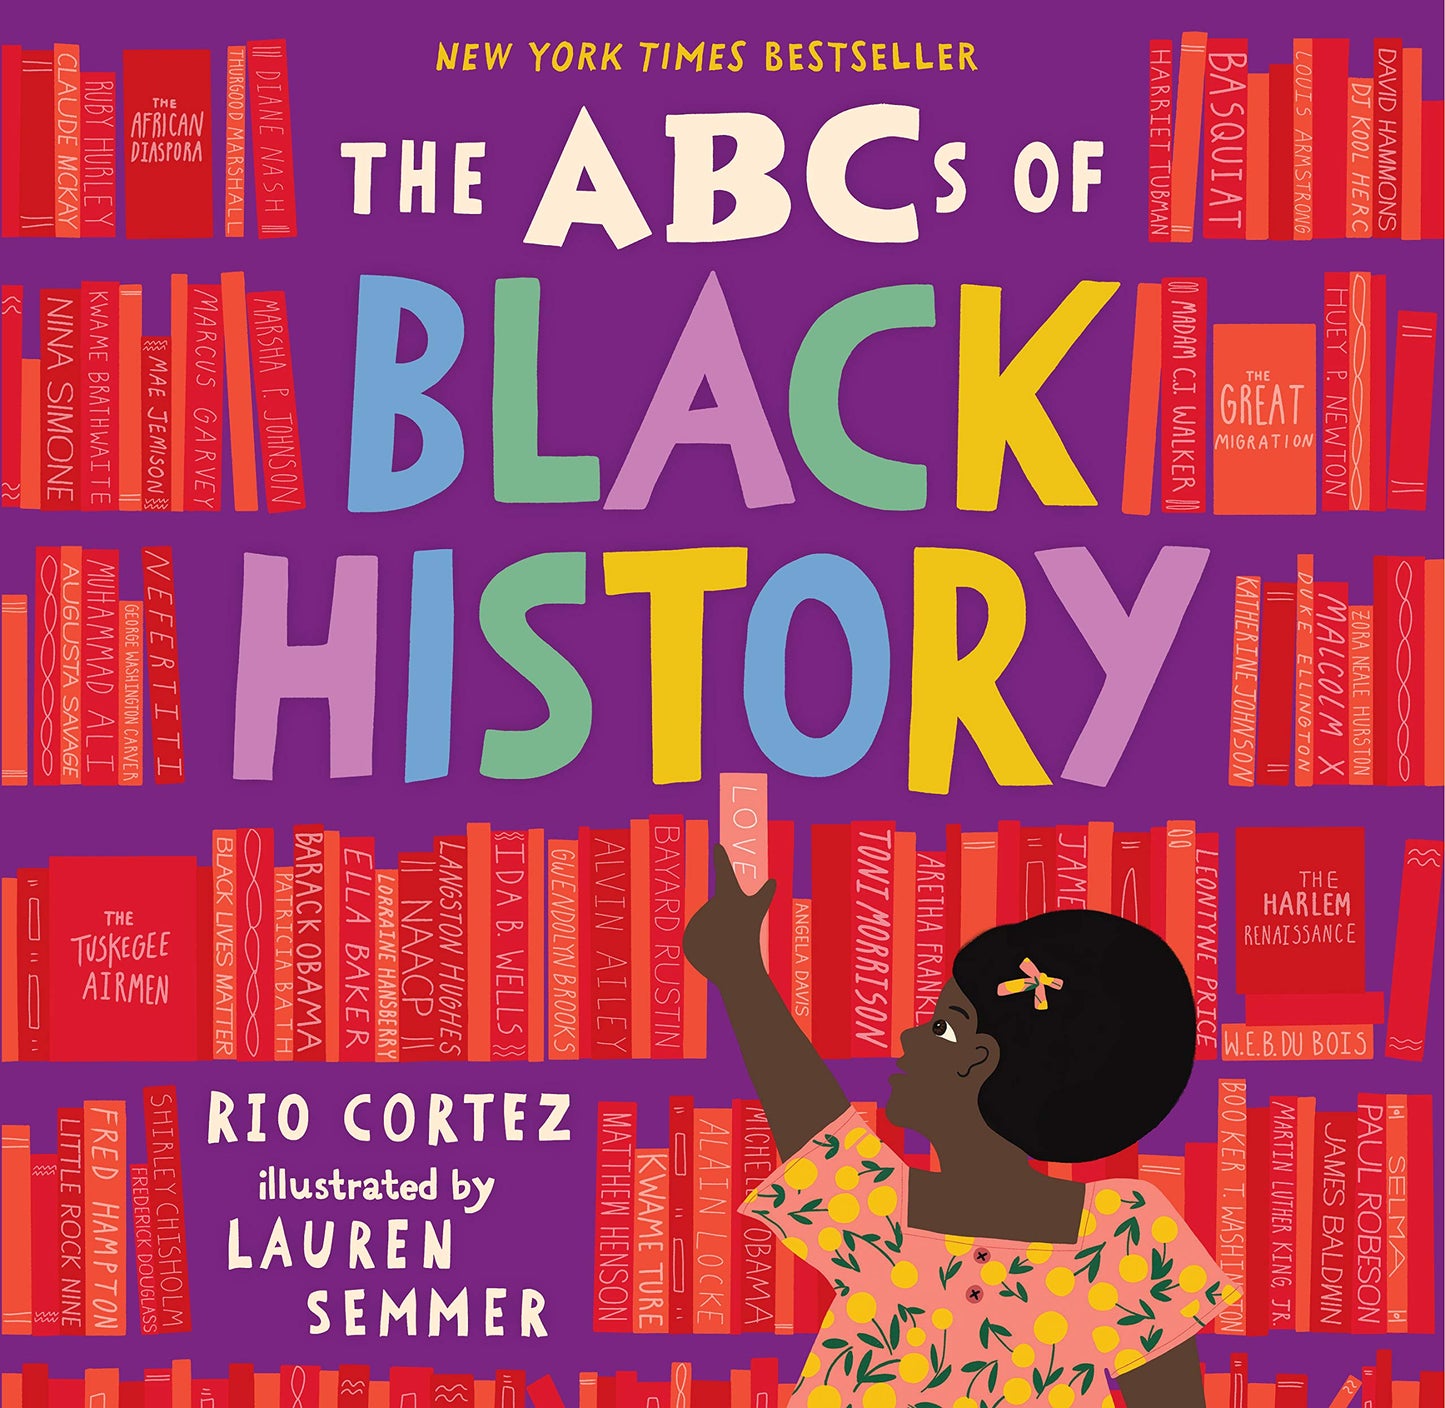 Book -  The ABC's of Black History (Hardcover)